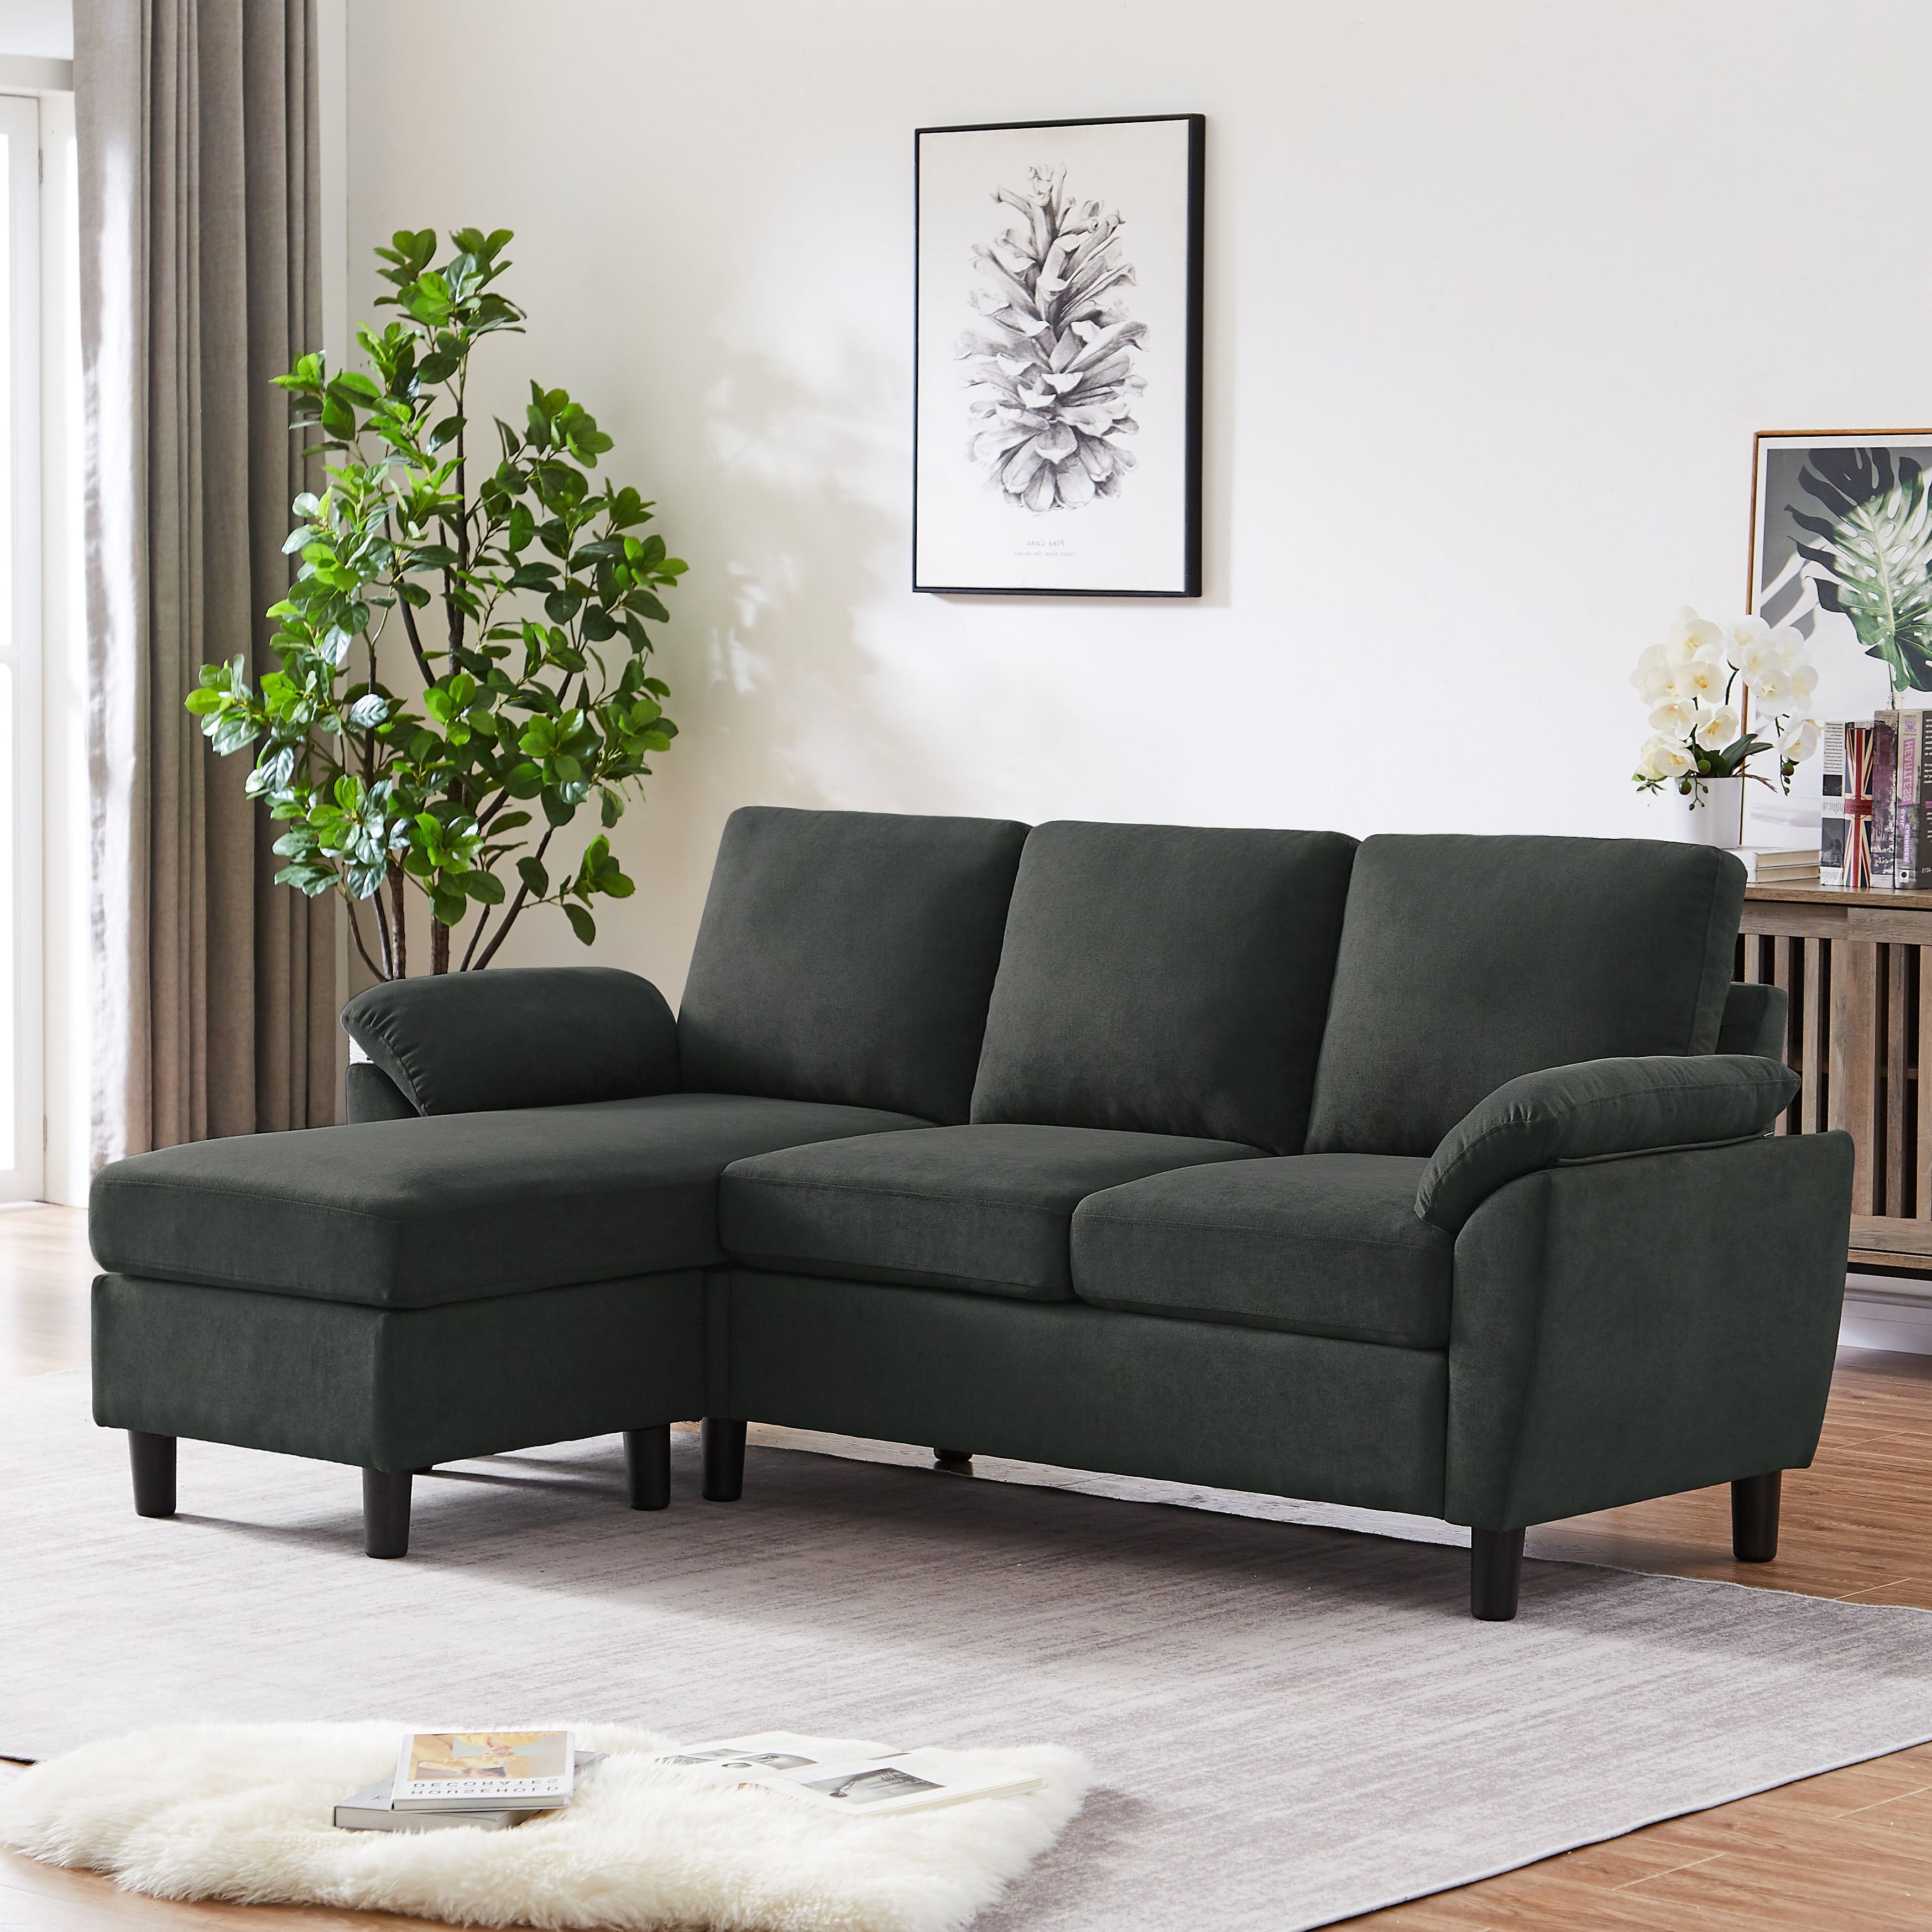 Jarenie Modern Fabric L Shapped Sofa Sectional Couches For Living Room Convertible  Sofa With Matching Chaise For Office, Apartment, Studio – Walmart With Regard To Convertible Sofas With Matching Chaise (View 2 of 20)